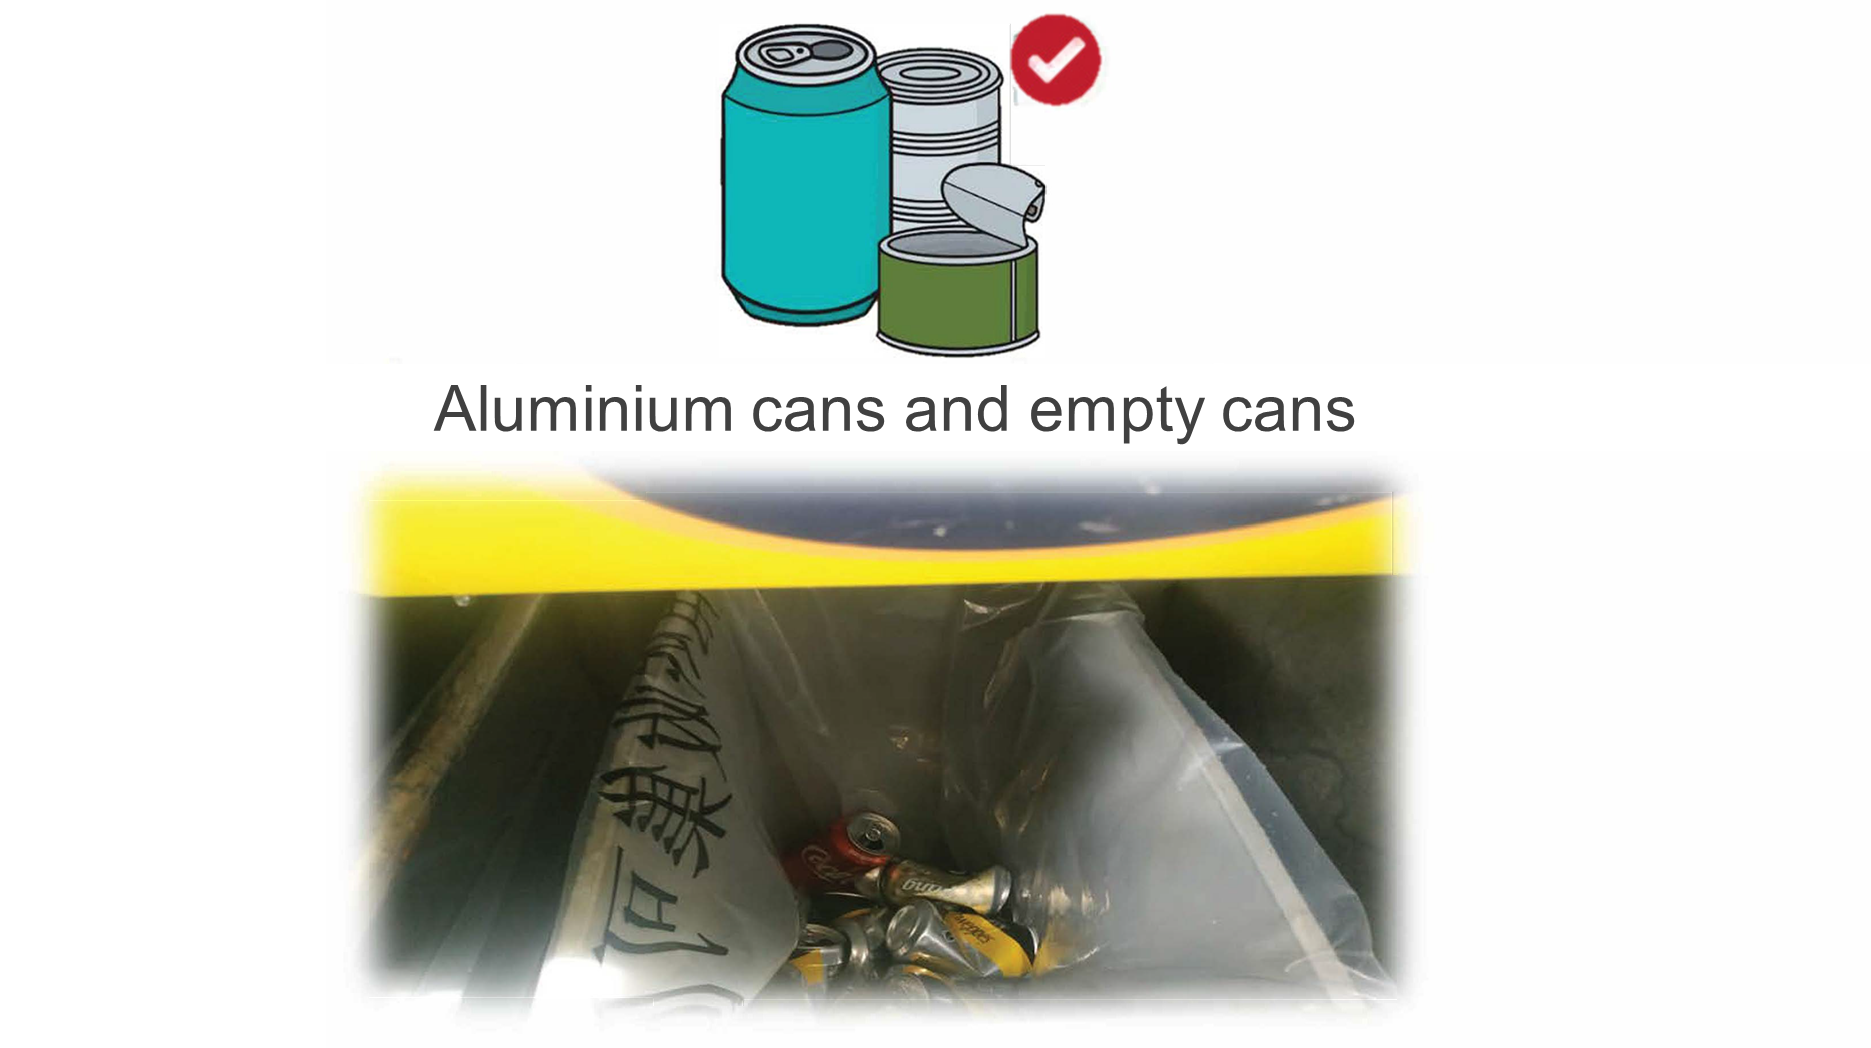 Clean recycling tips for aluminum cans and empty cans - remove labels, rinse before recycling